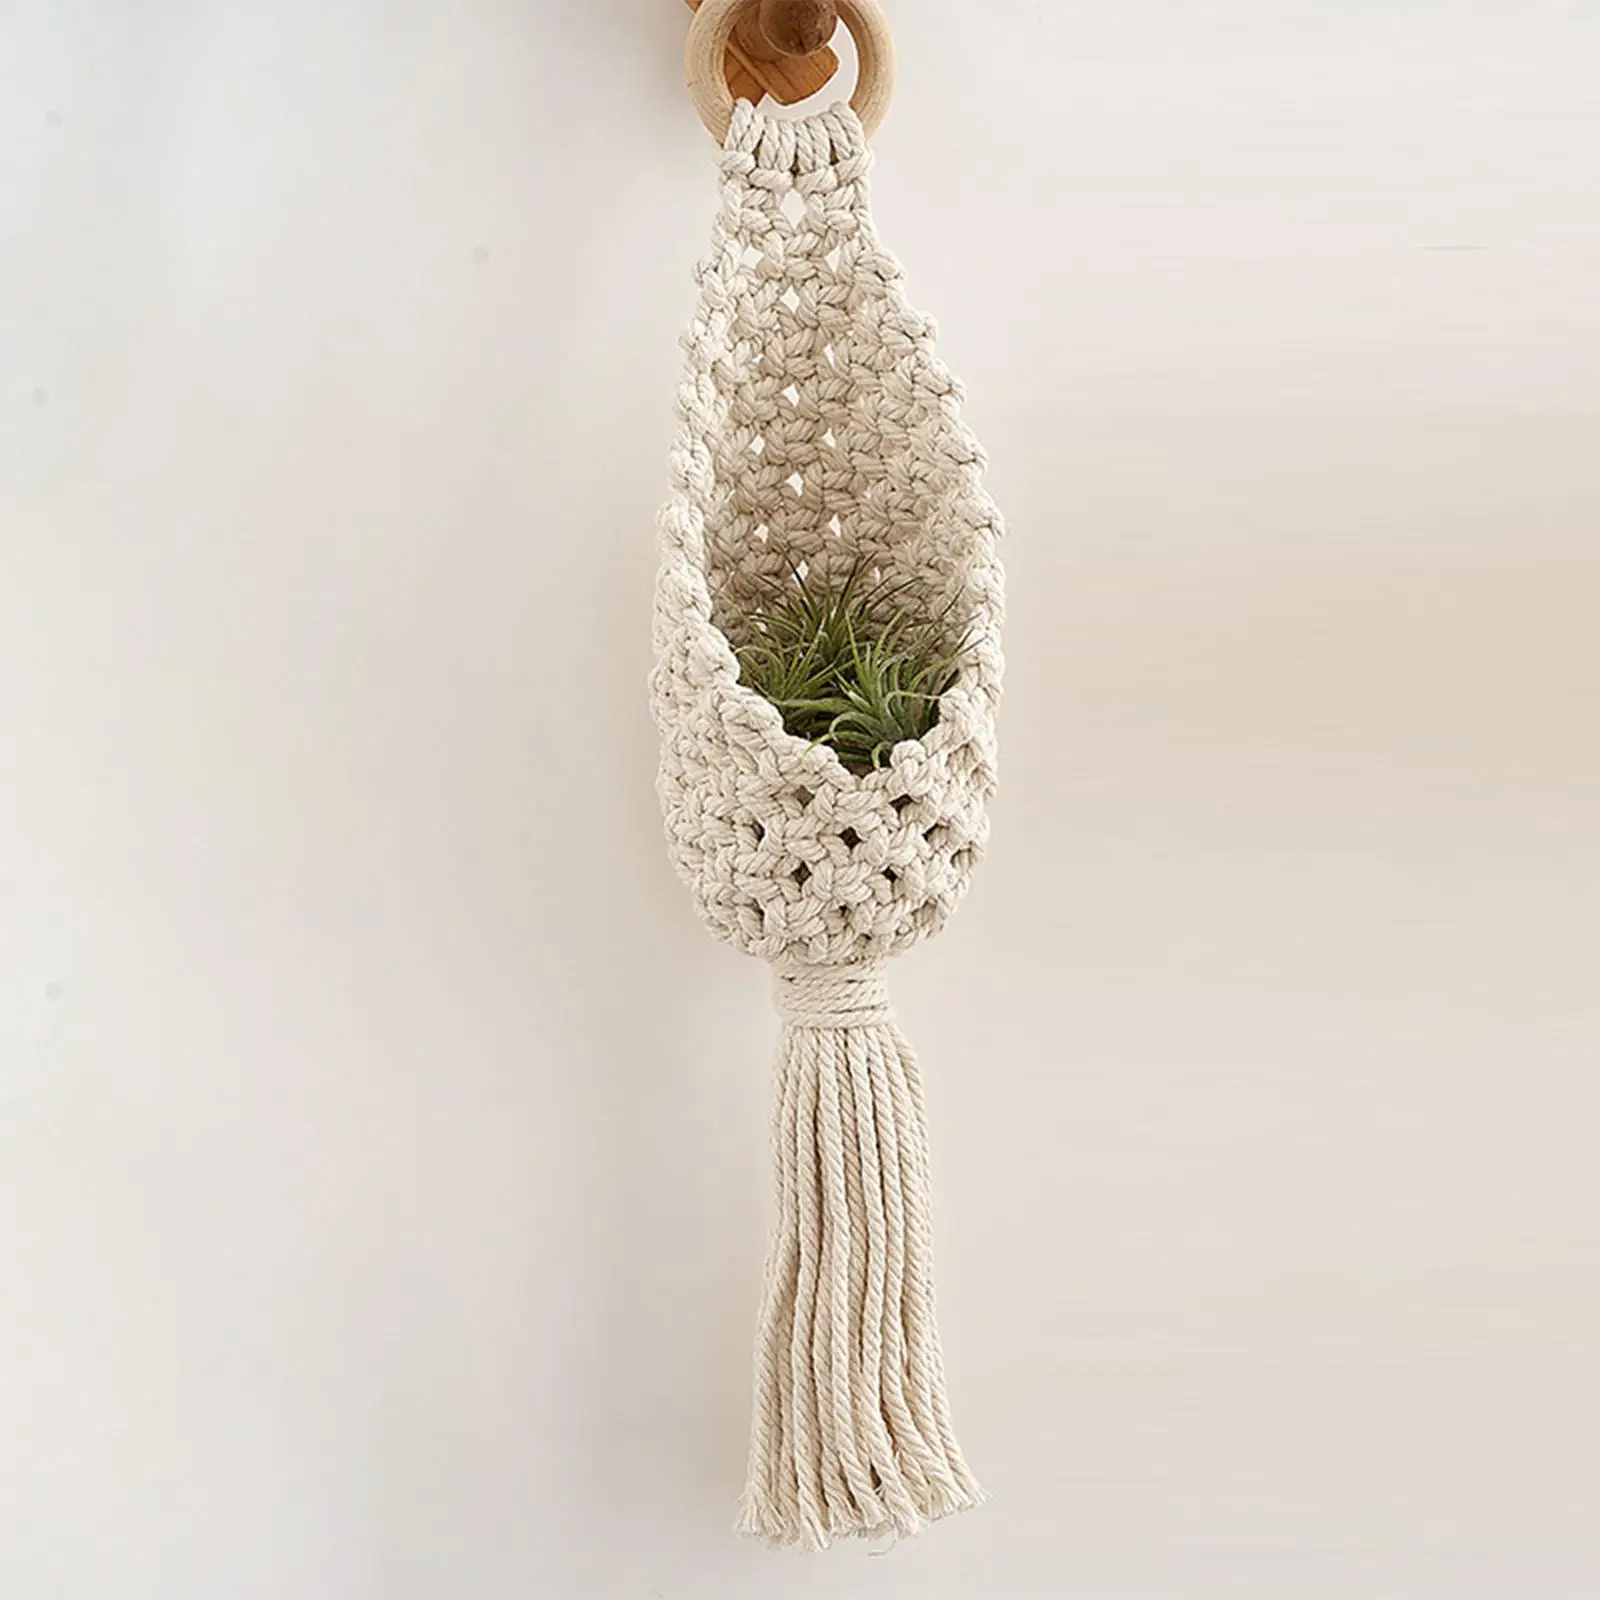 Boho Hanging Wall Vegetable Fruit Baskets Portable Woven Hanging Onion Basket for Garden Supplies Landscaping Office Wall Decor